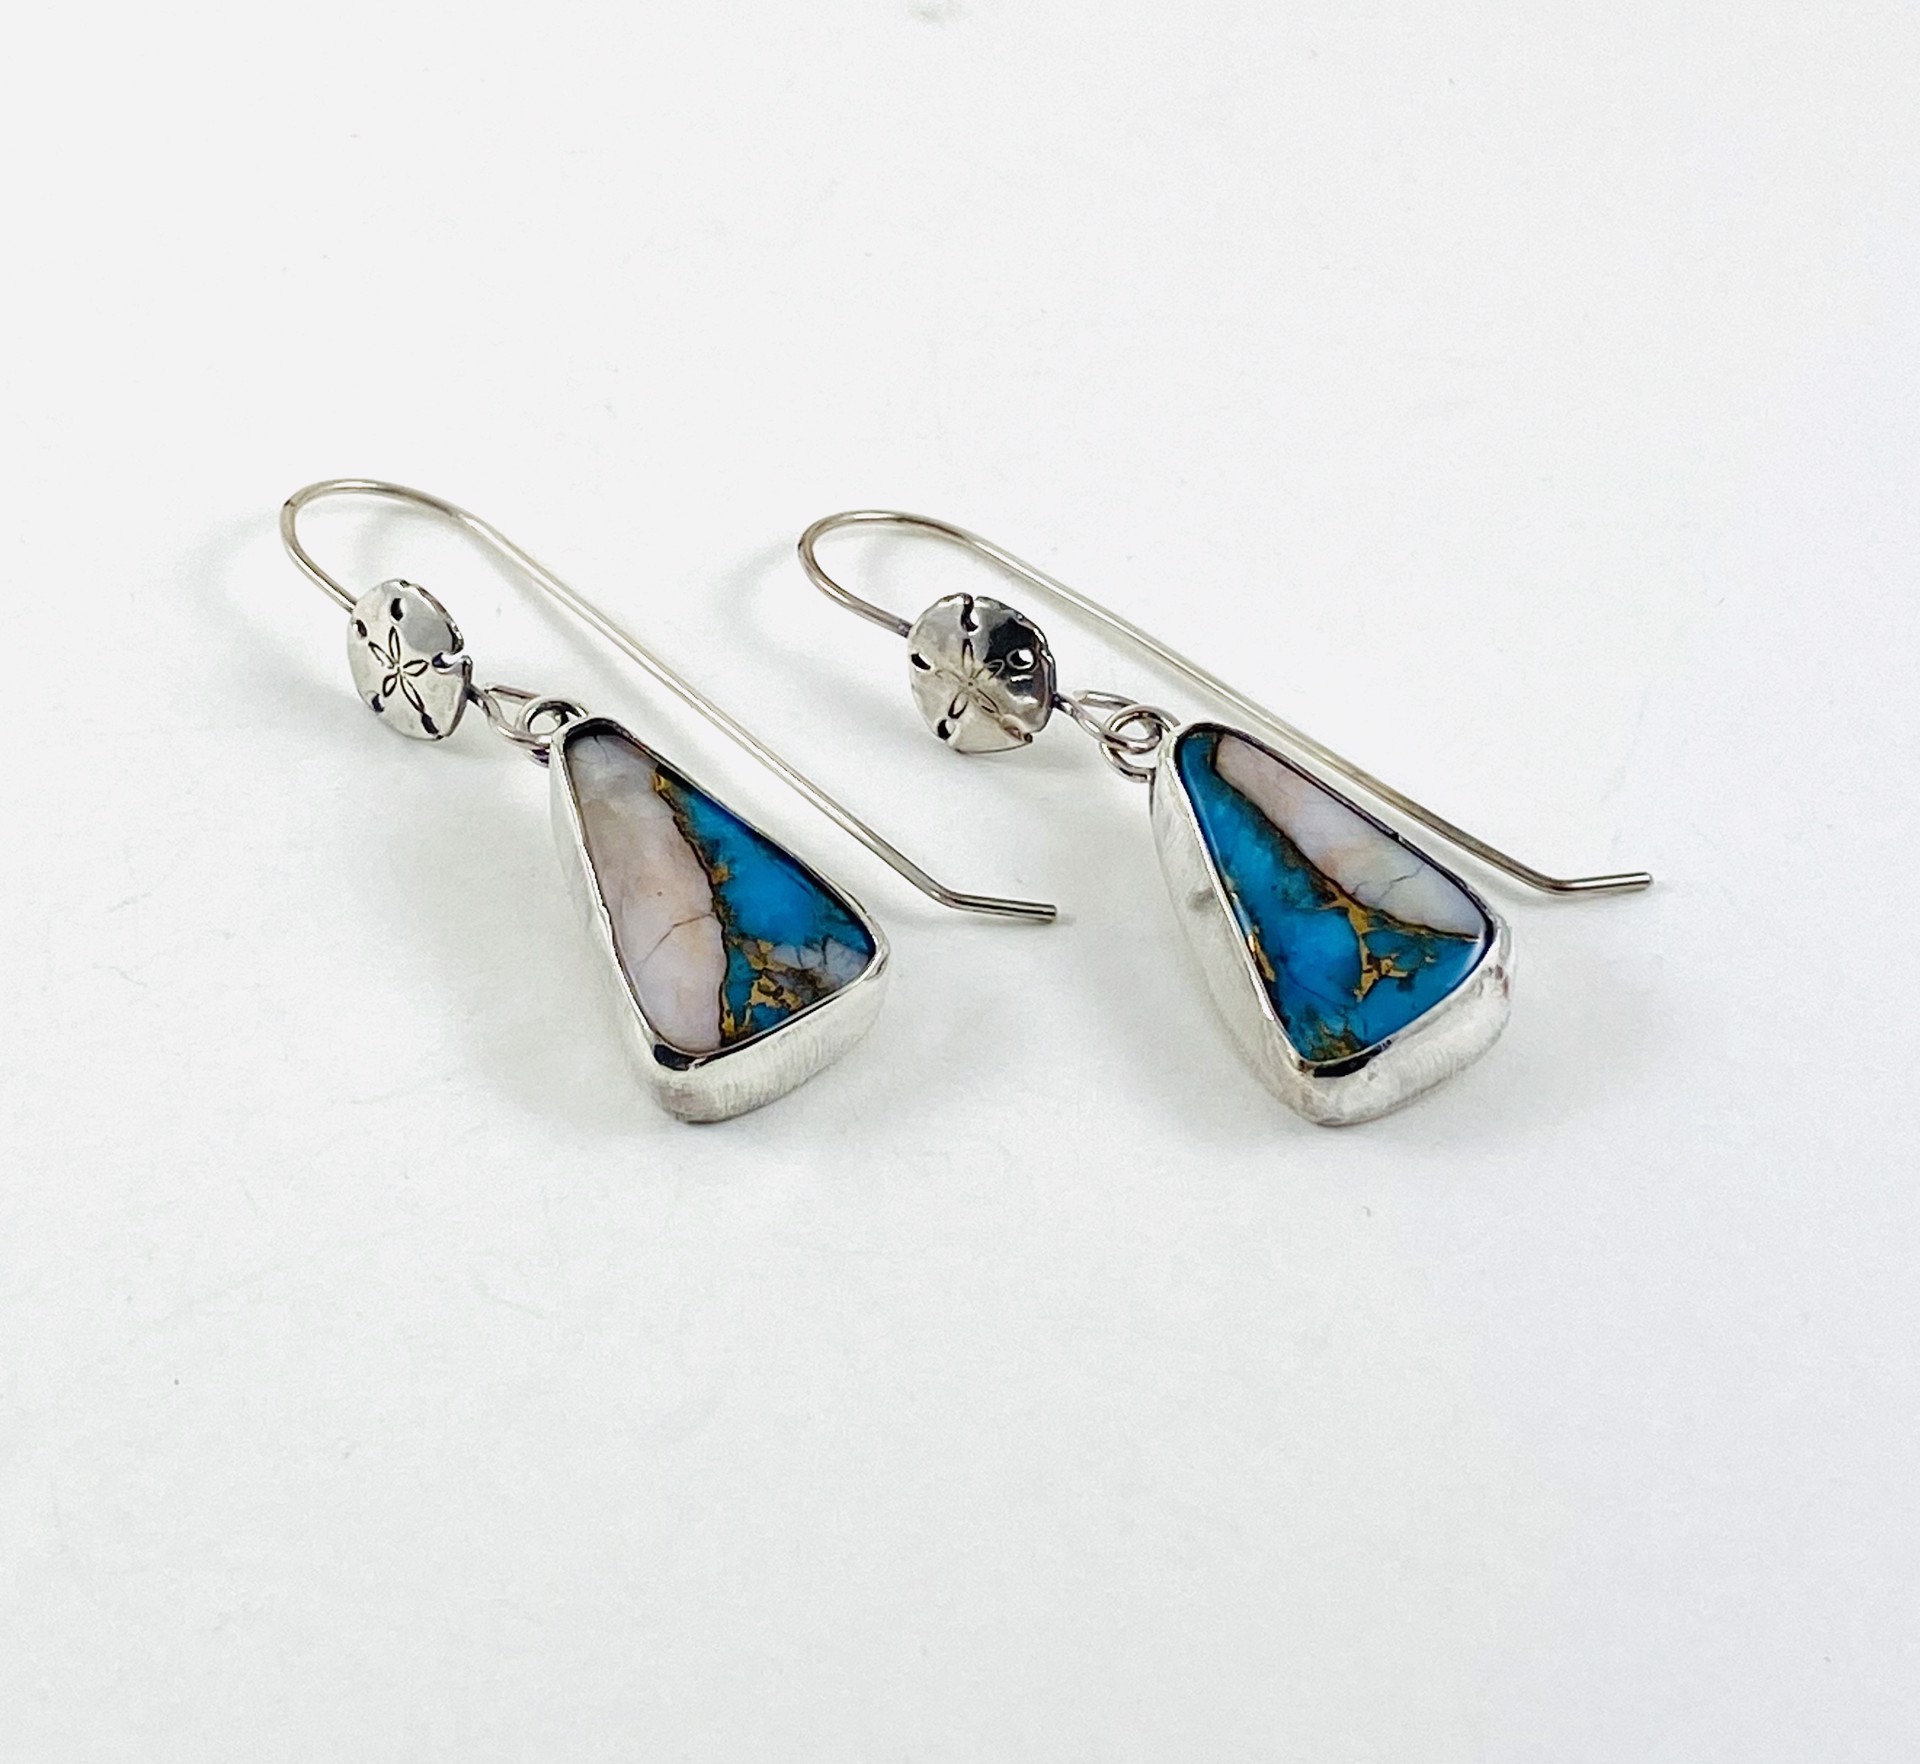 Kingsman Turquoise, Peruvian Opal and Bronze set in Silver, Earrings #234 by Anne Bivens